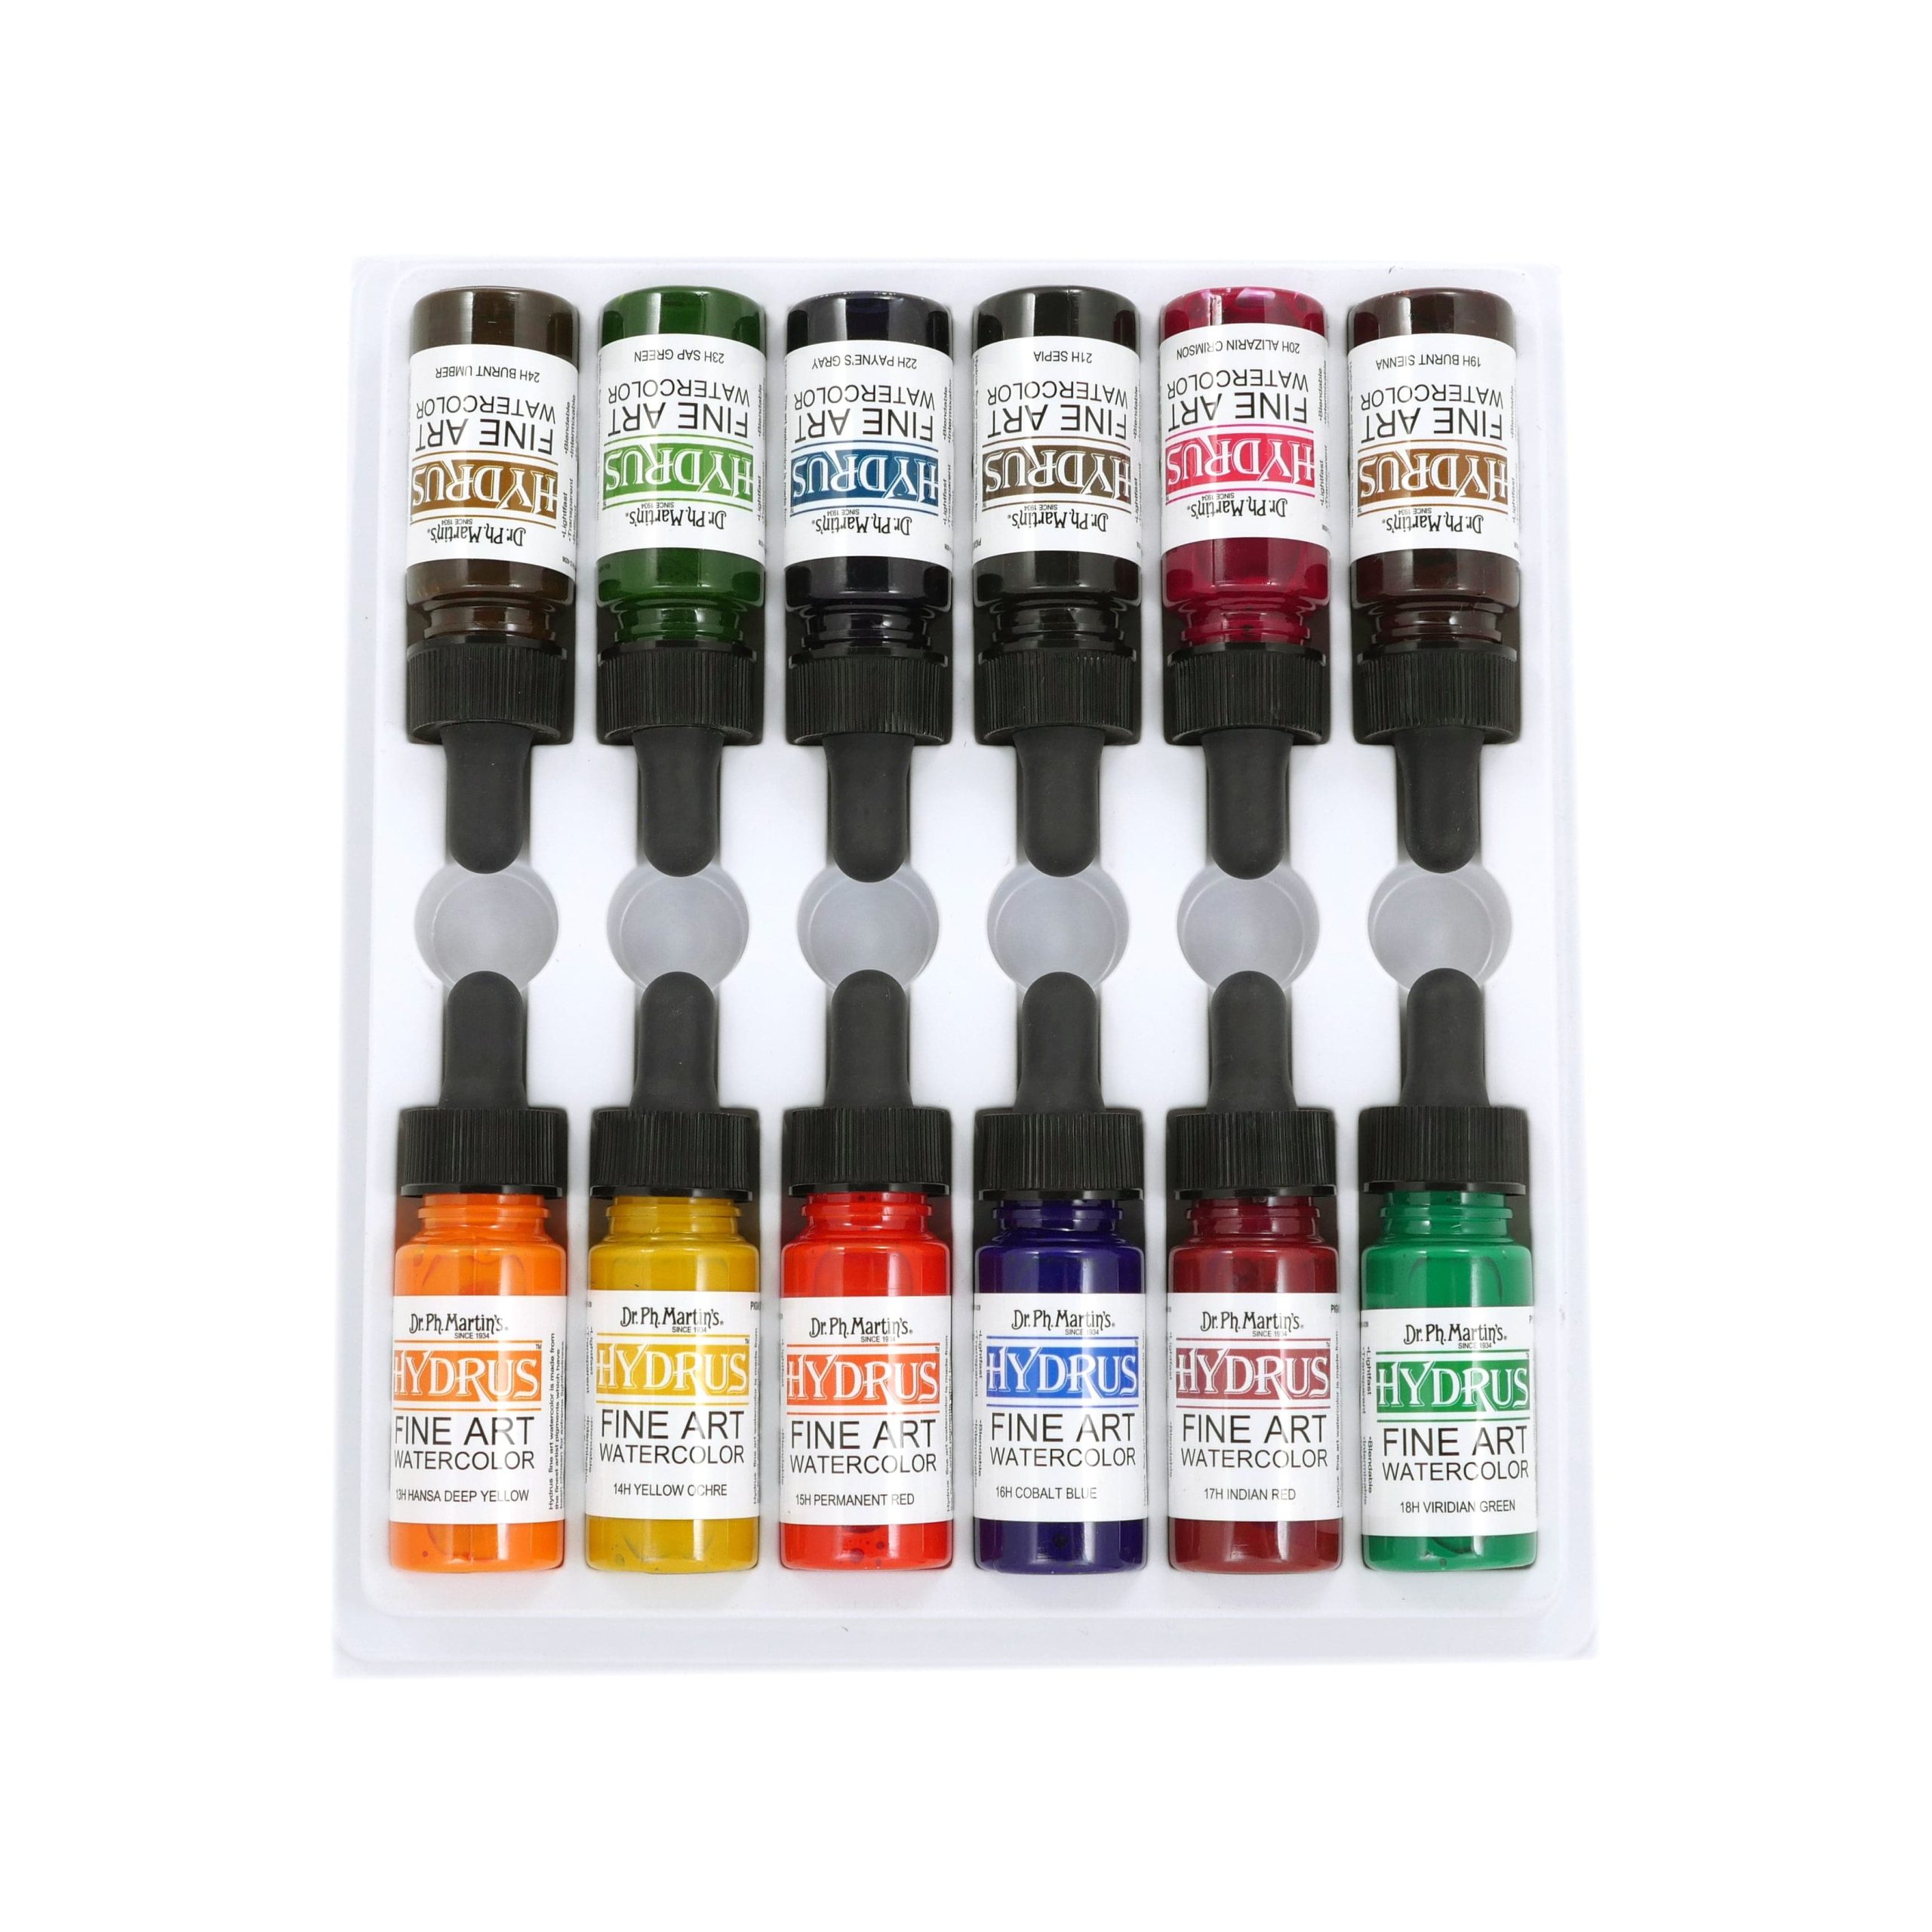 Buy the best Dr. Ph. Martin's Hydrus Fine Art Watercolour Paint 14.78ml Set  of 12 (Set 2) SAL for unbeatable prices